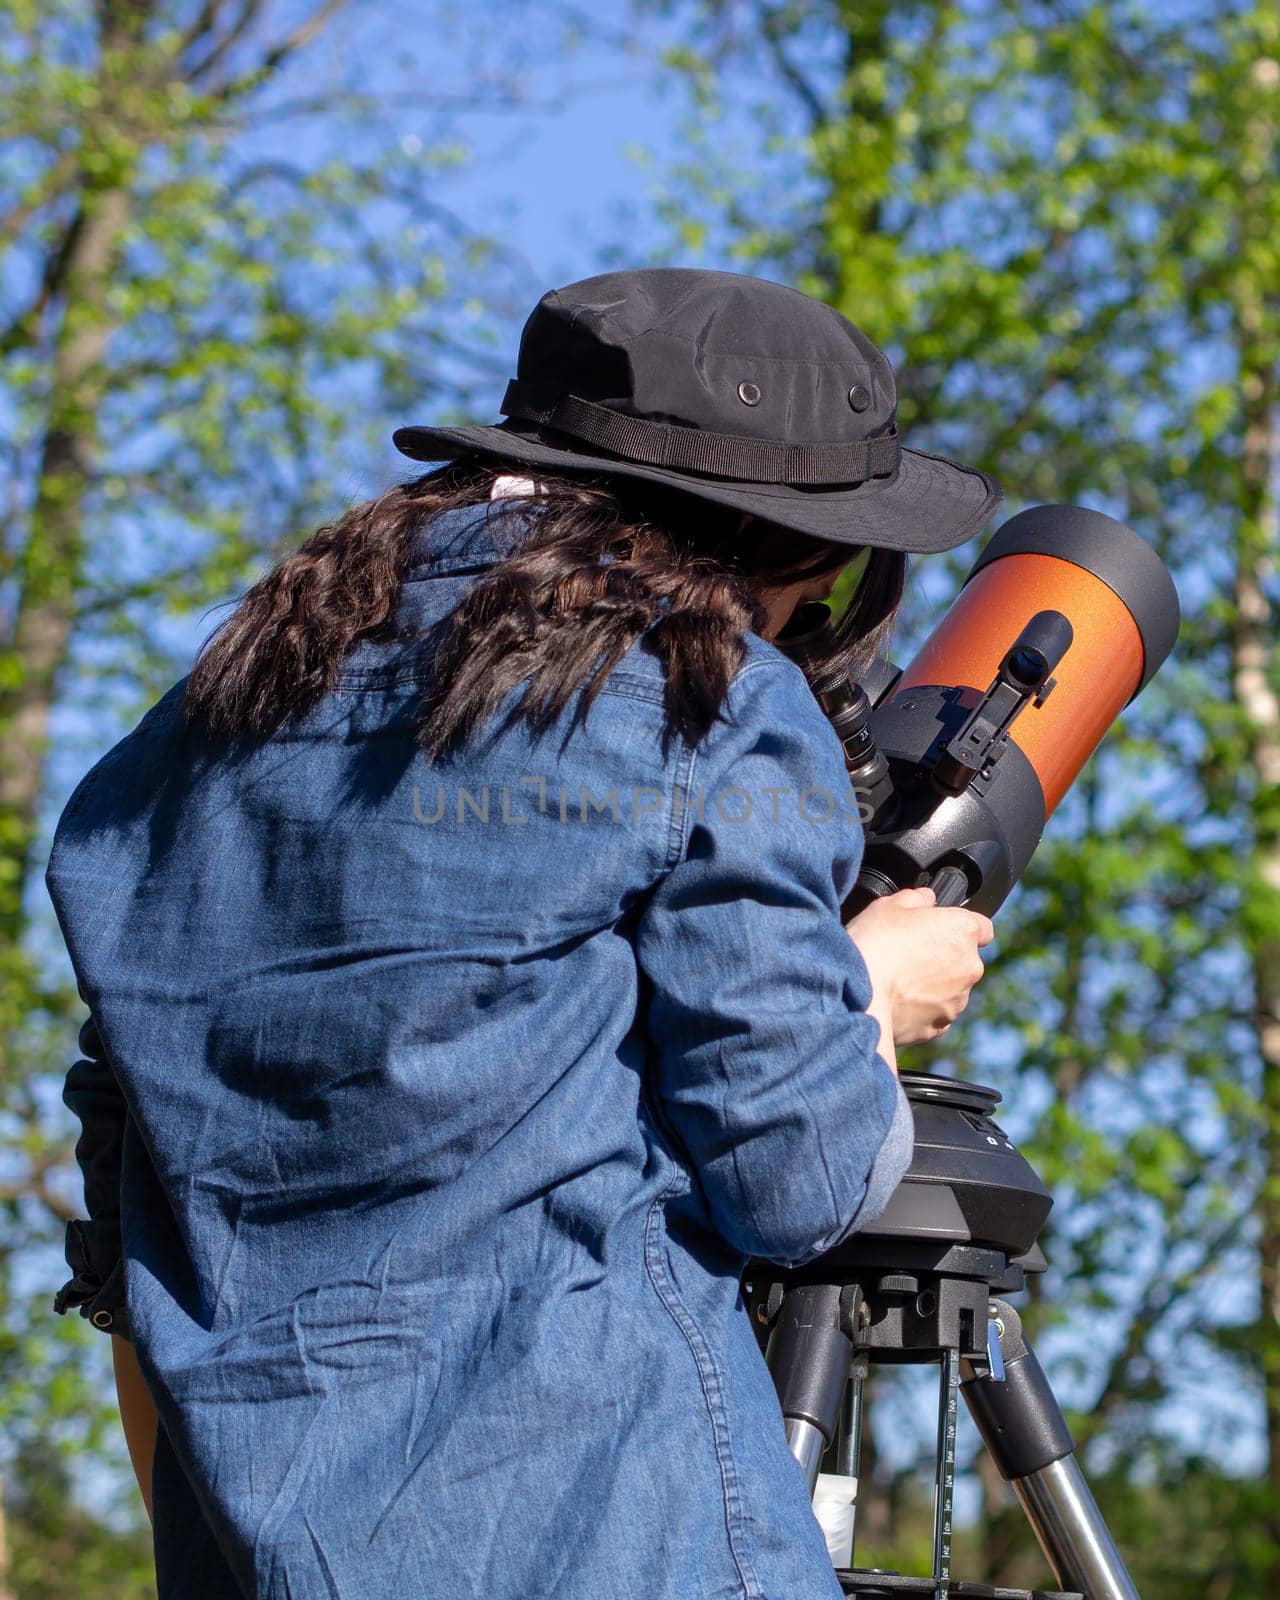 Portrait of young woman looking through the telescope on the hil